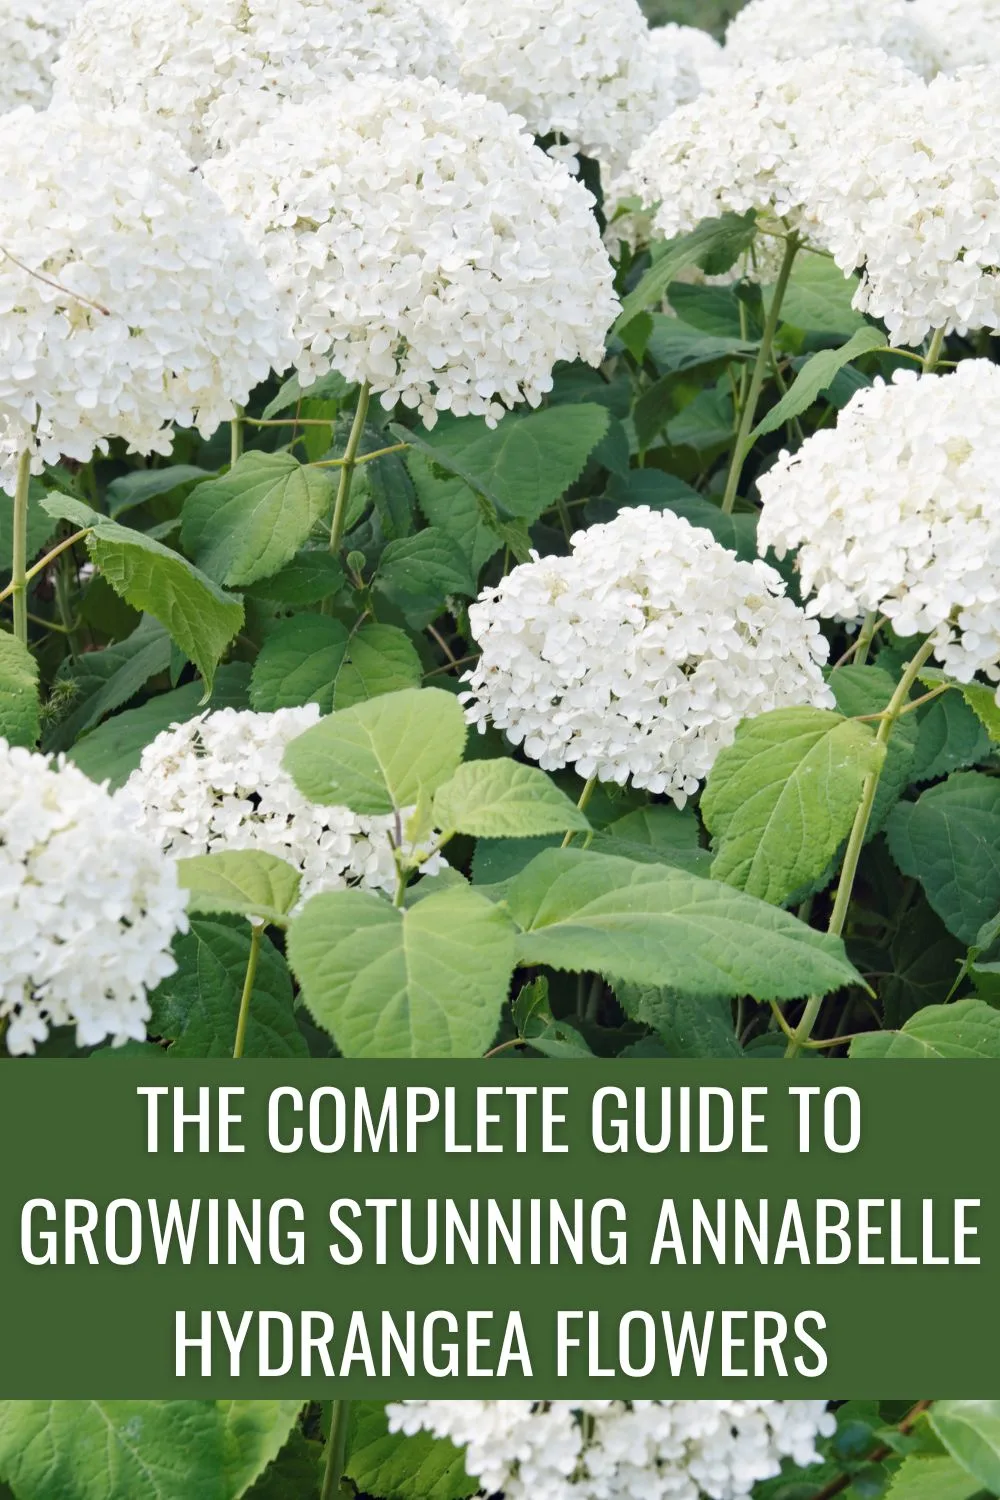 The Complete Guide To Growing Stunning Annabelle Hydrangea Flowers.